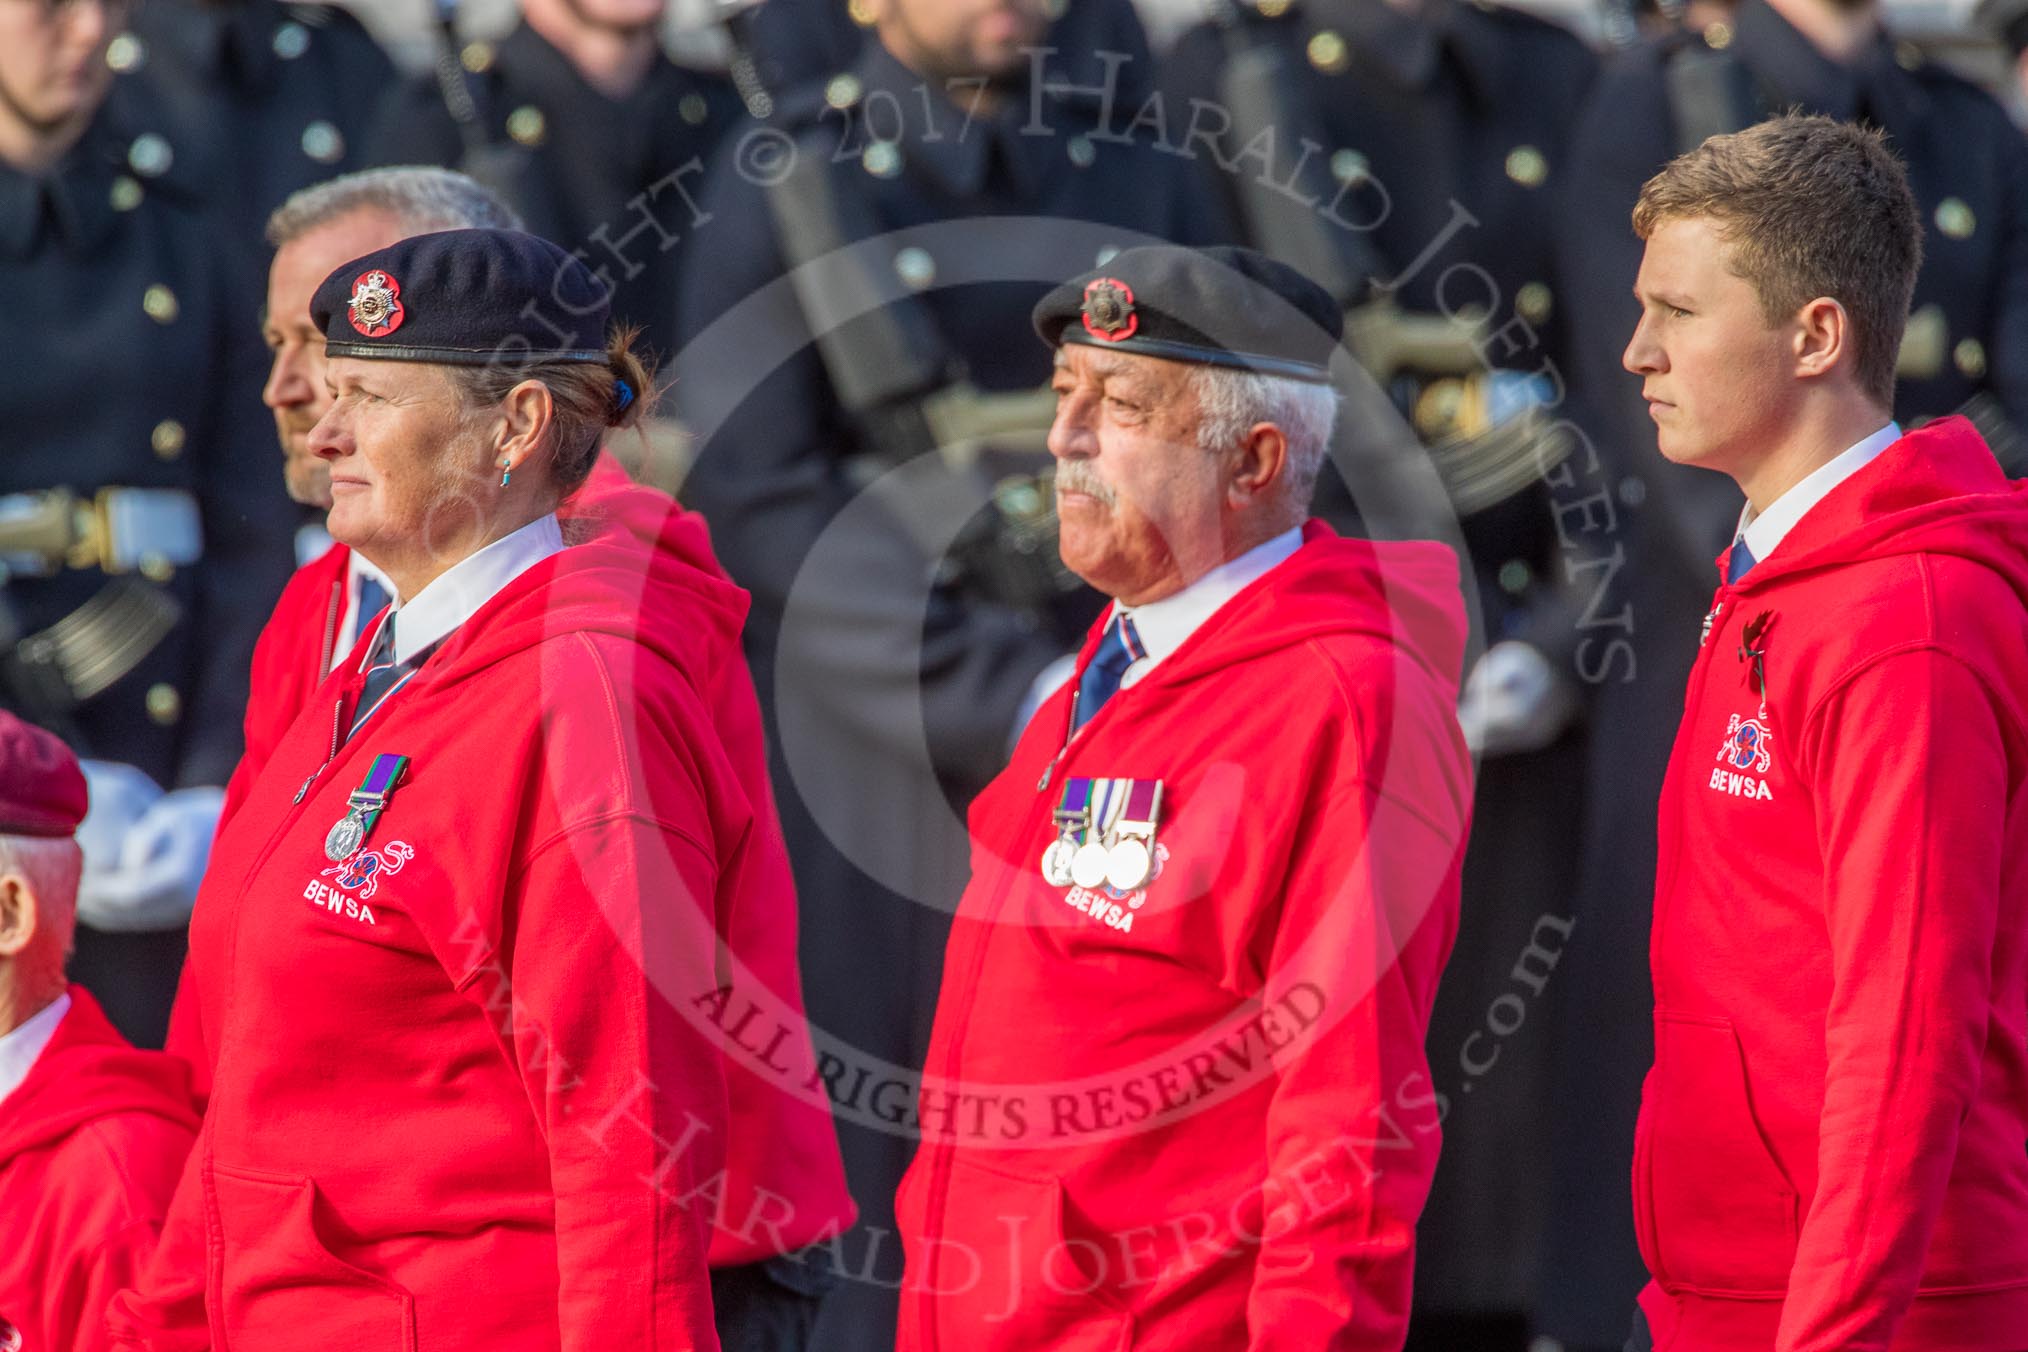 British Ex-Services Wheelchair Sports Association  (Group AA2, 14 members) during the Royal British Legion March Past on Remembrance Sunday at the Cenotaph, Whitehall, Westminster, London, 11 November 2018, 11:48.